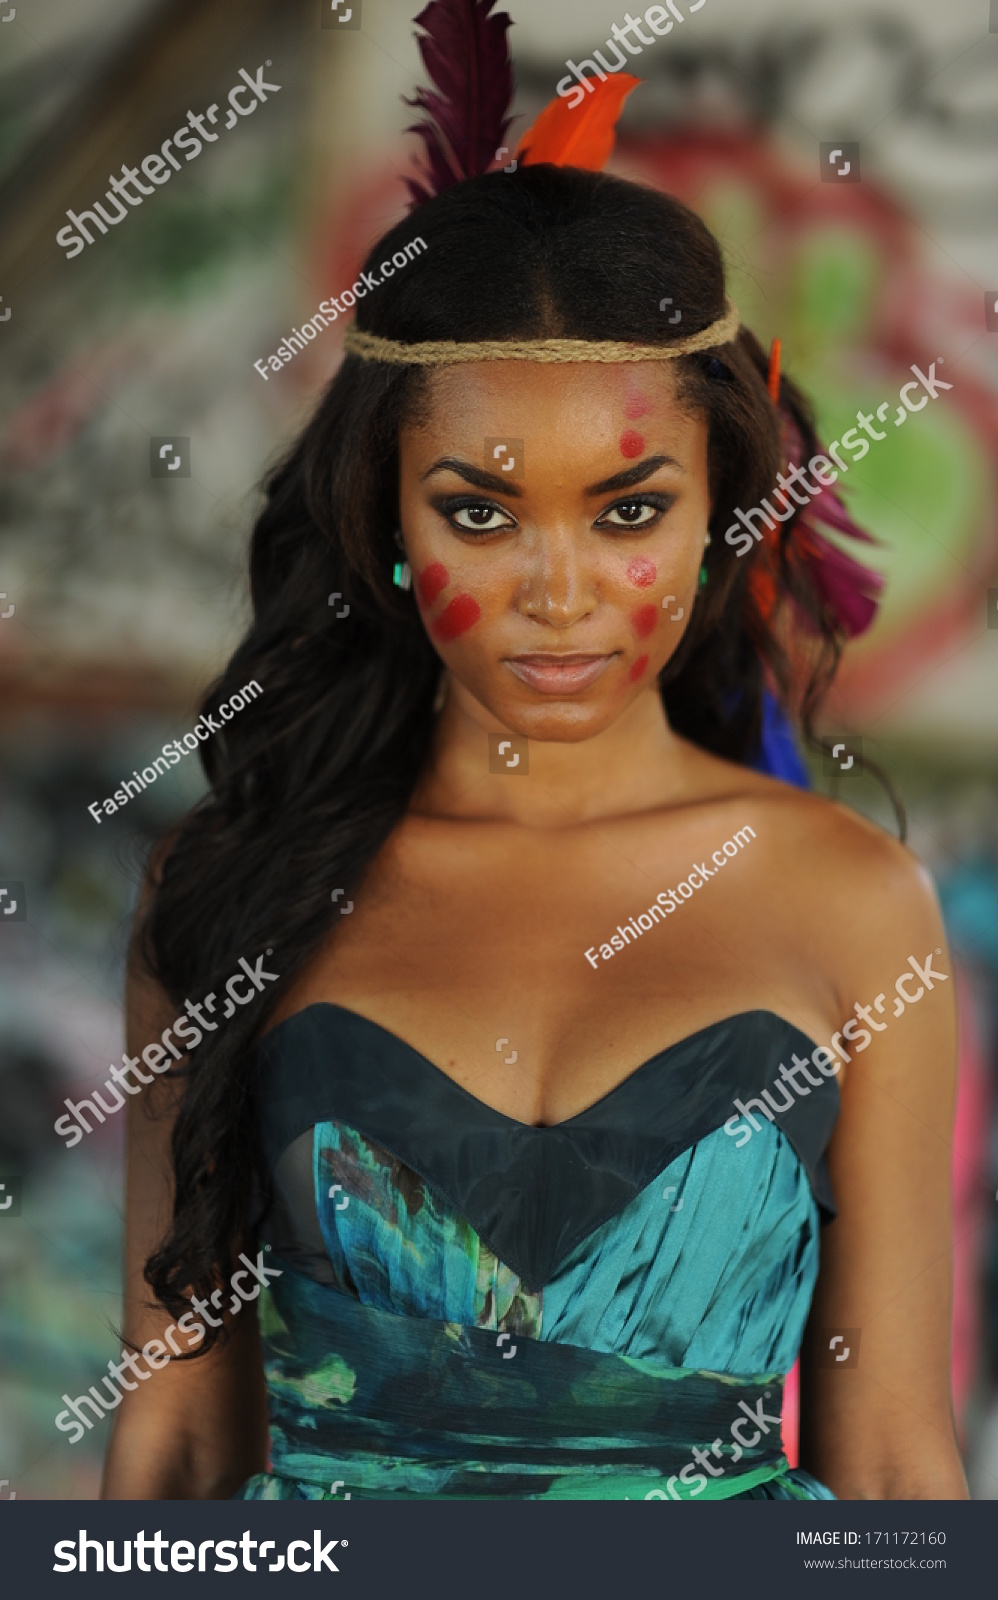 stock-photo-portrait-of-young-beautiful-indian-cherokee-woman-with-feathers-in-her-hair-and-traditional-makeup-171172160.jpg